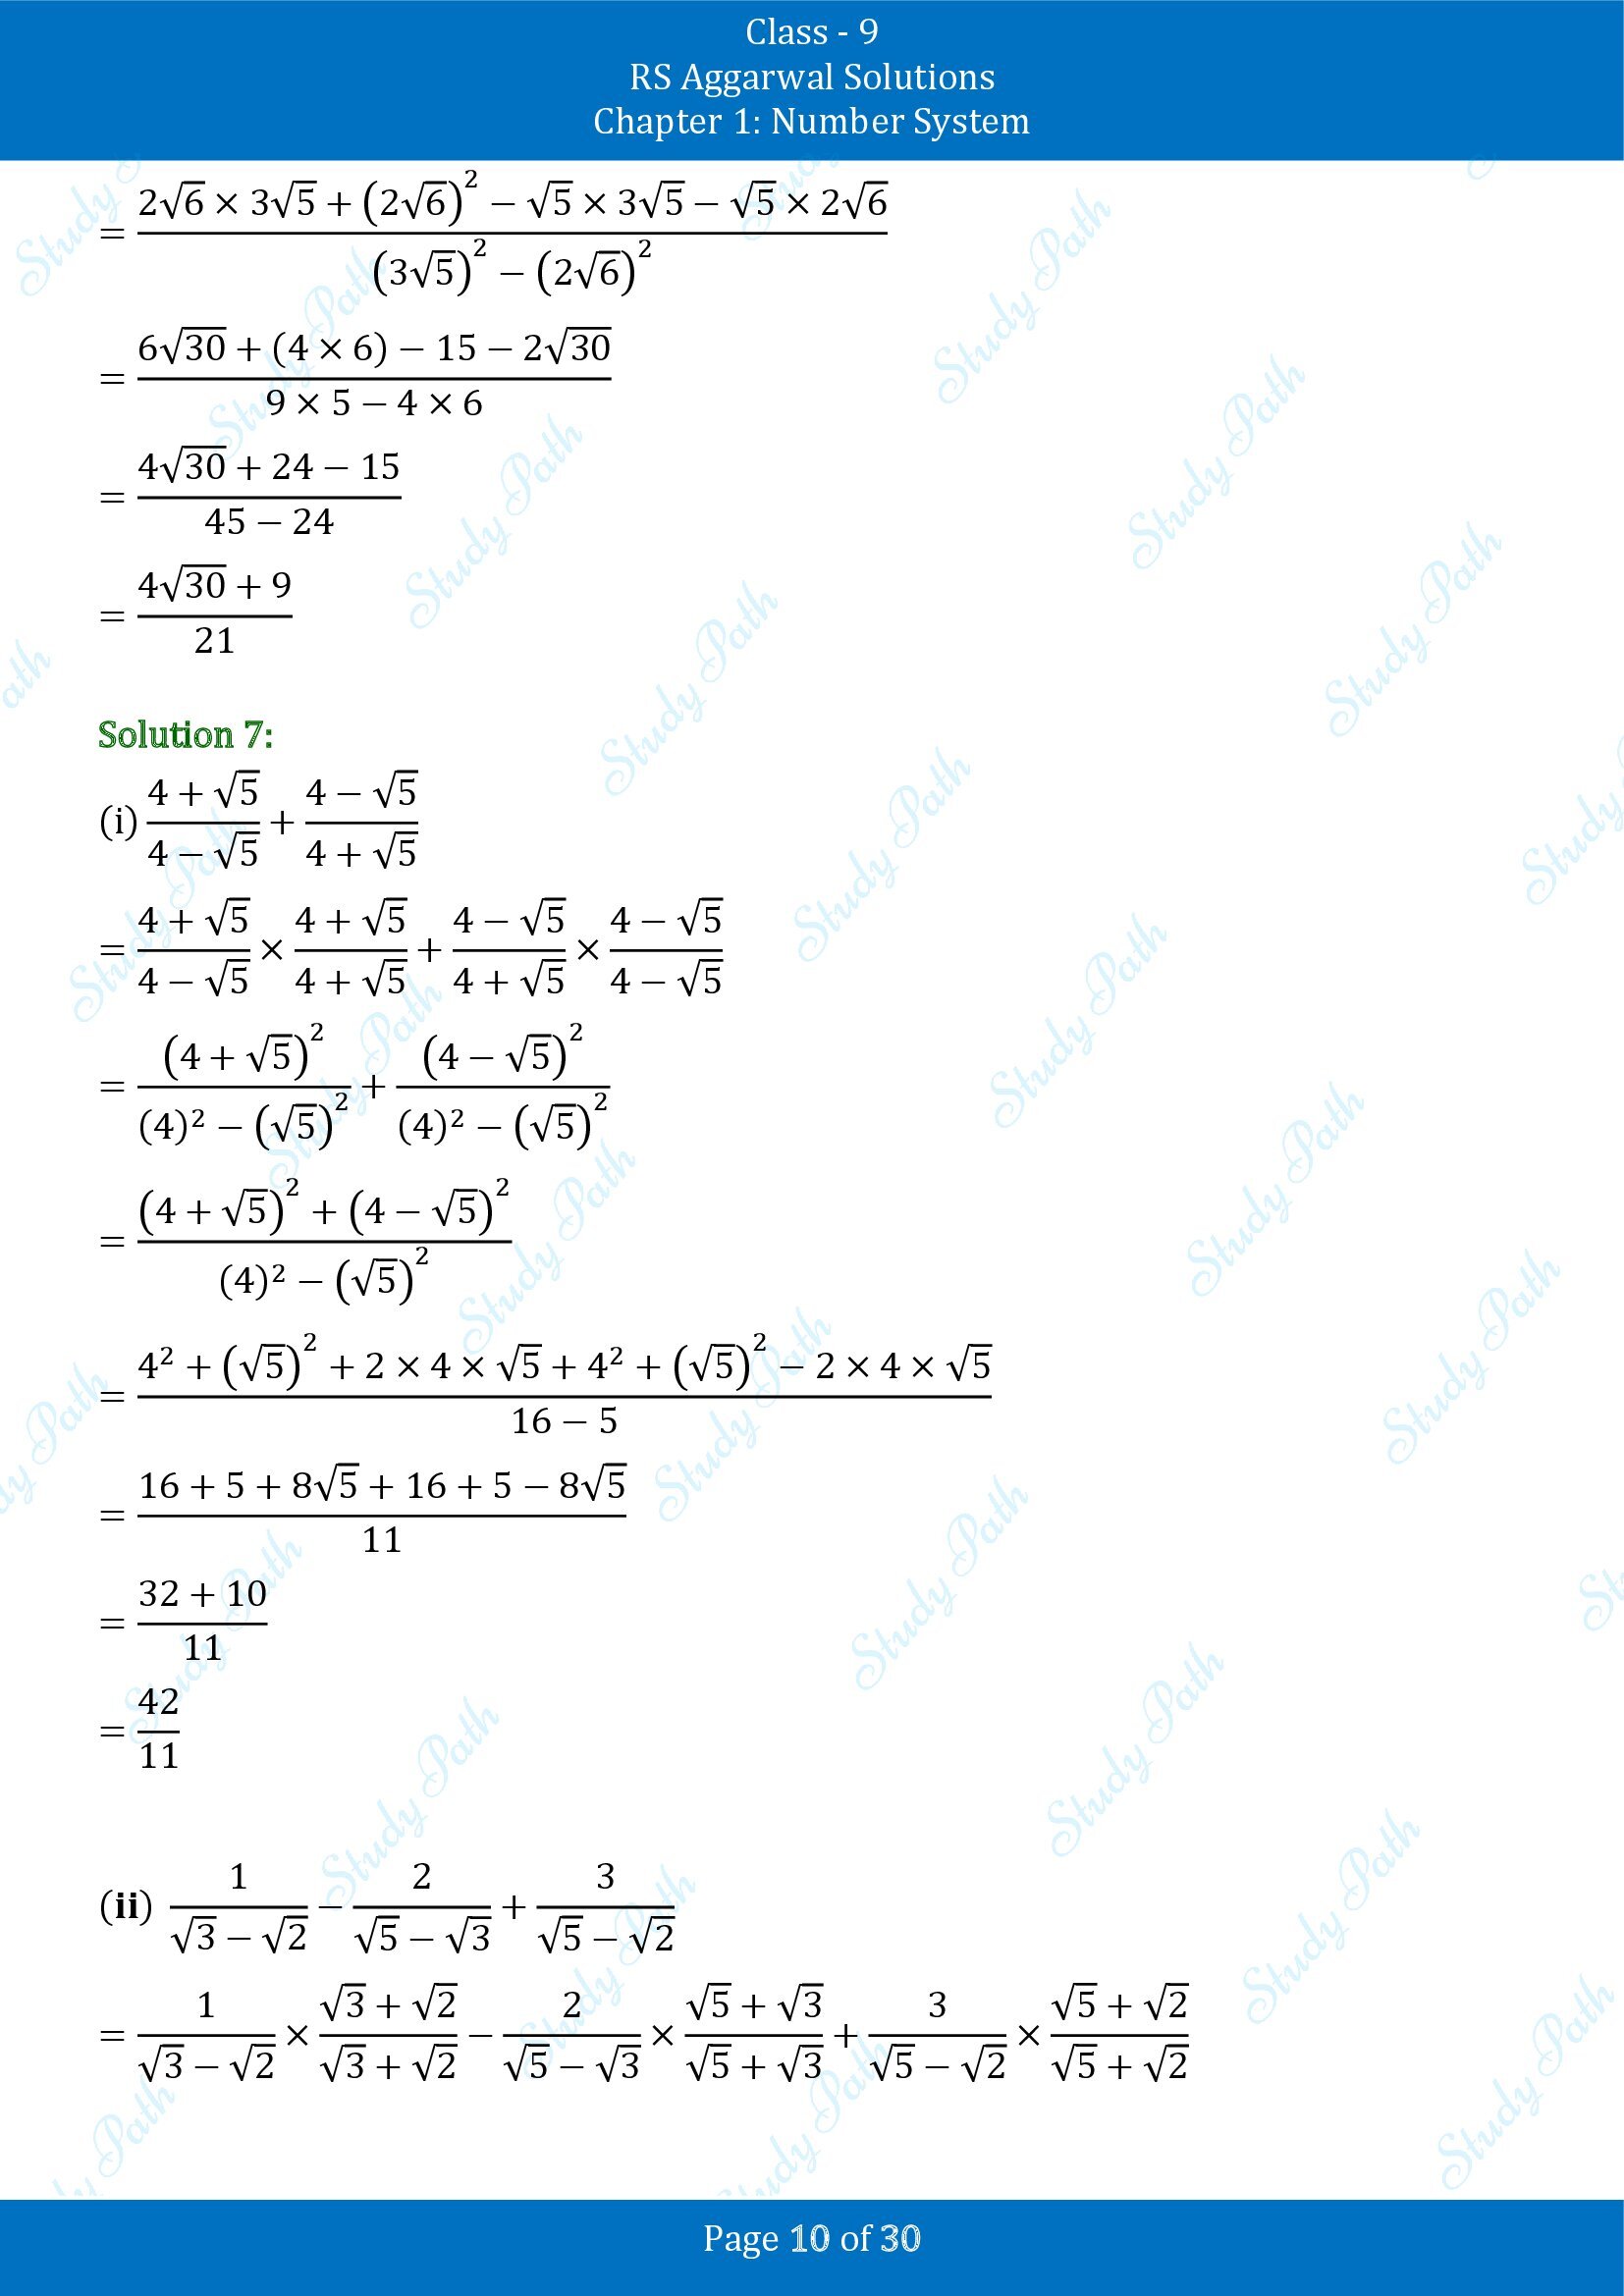 RS Aggarwal Solutions Class 9 Chapter 1 Number System Exercise 1F 00010